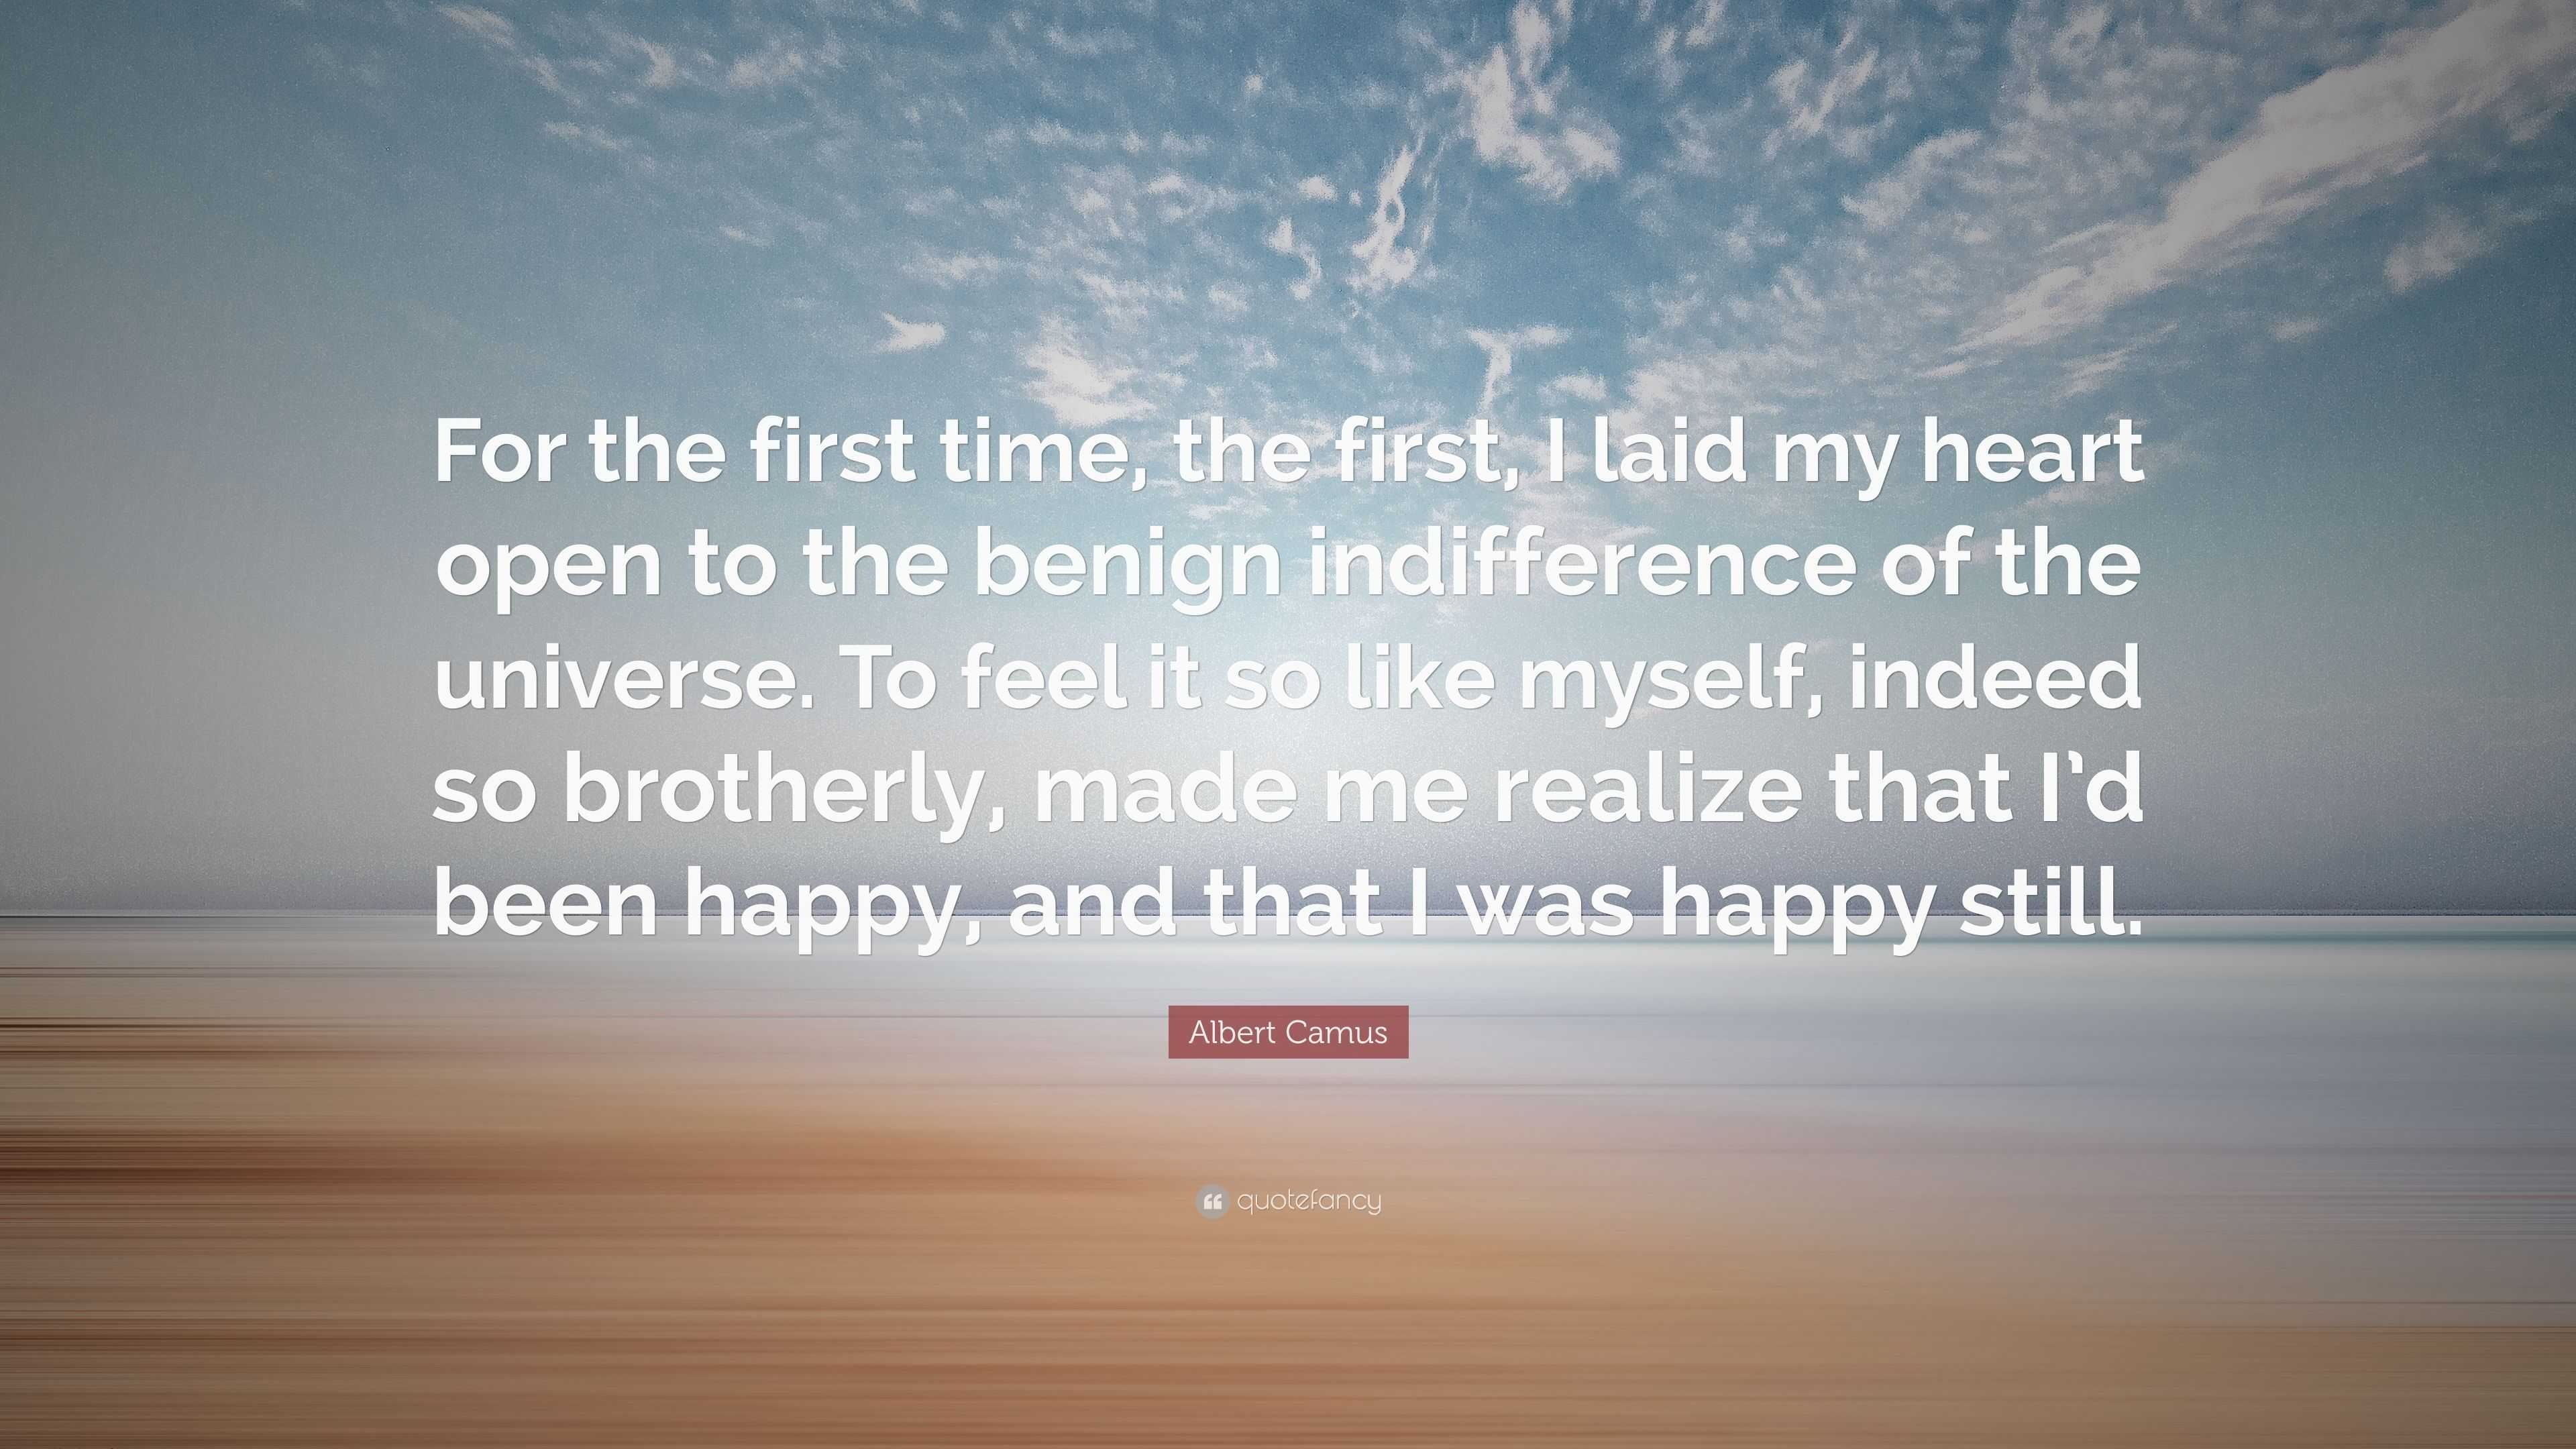 Albert Camus Quote: “For the first time, the first, I laid my heart ...